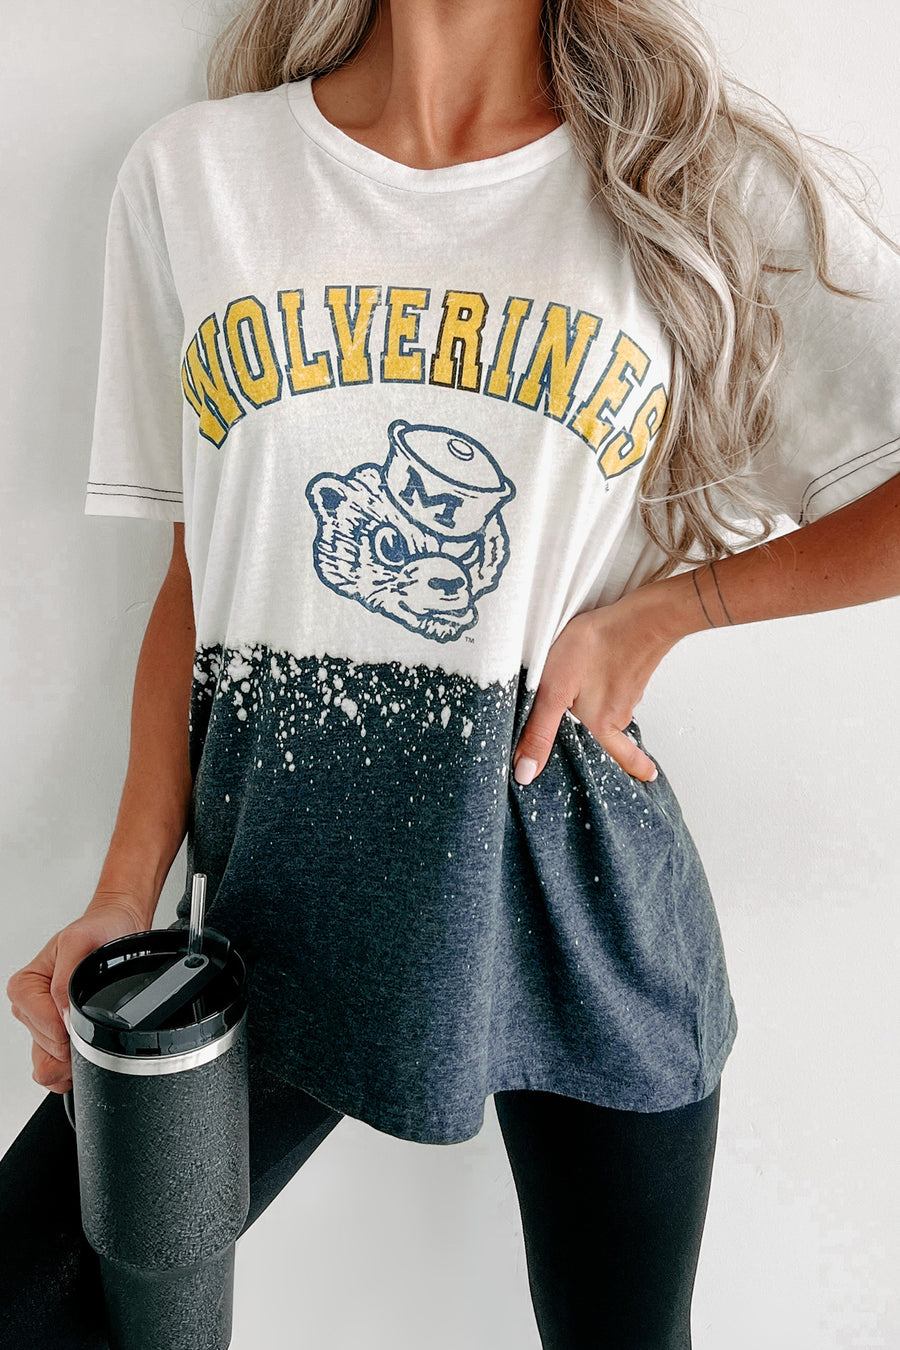 "Wolverines" Bleached Dyed Graphic T-Shirt (White/Charcoal Grey) - NanaMacs